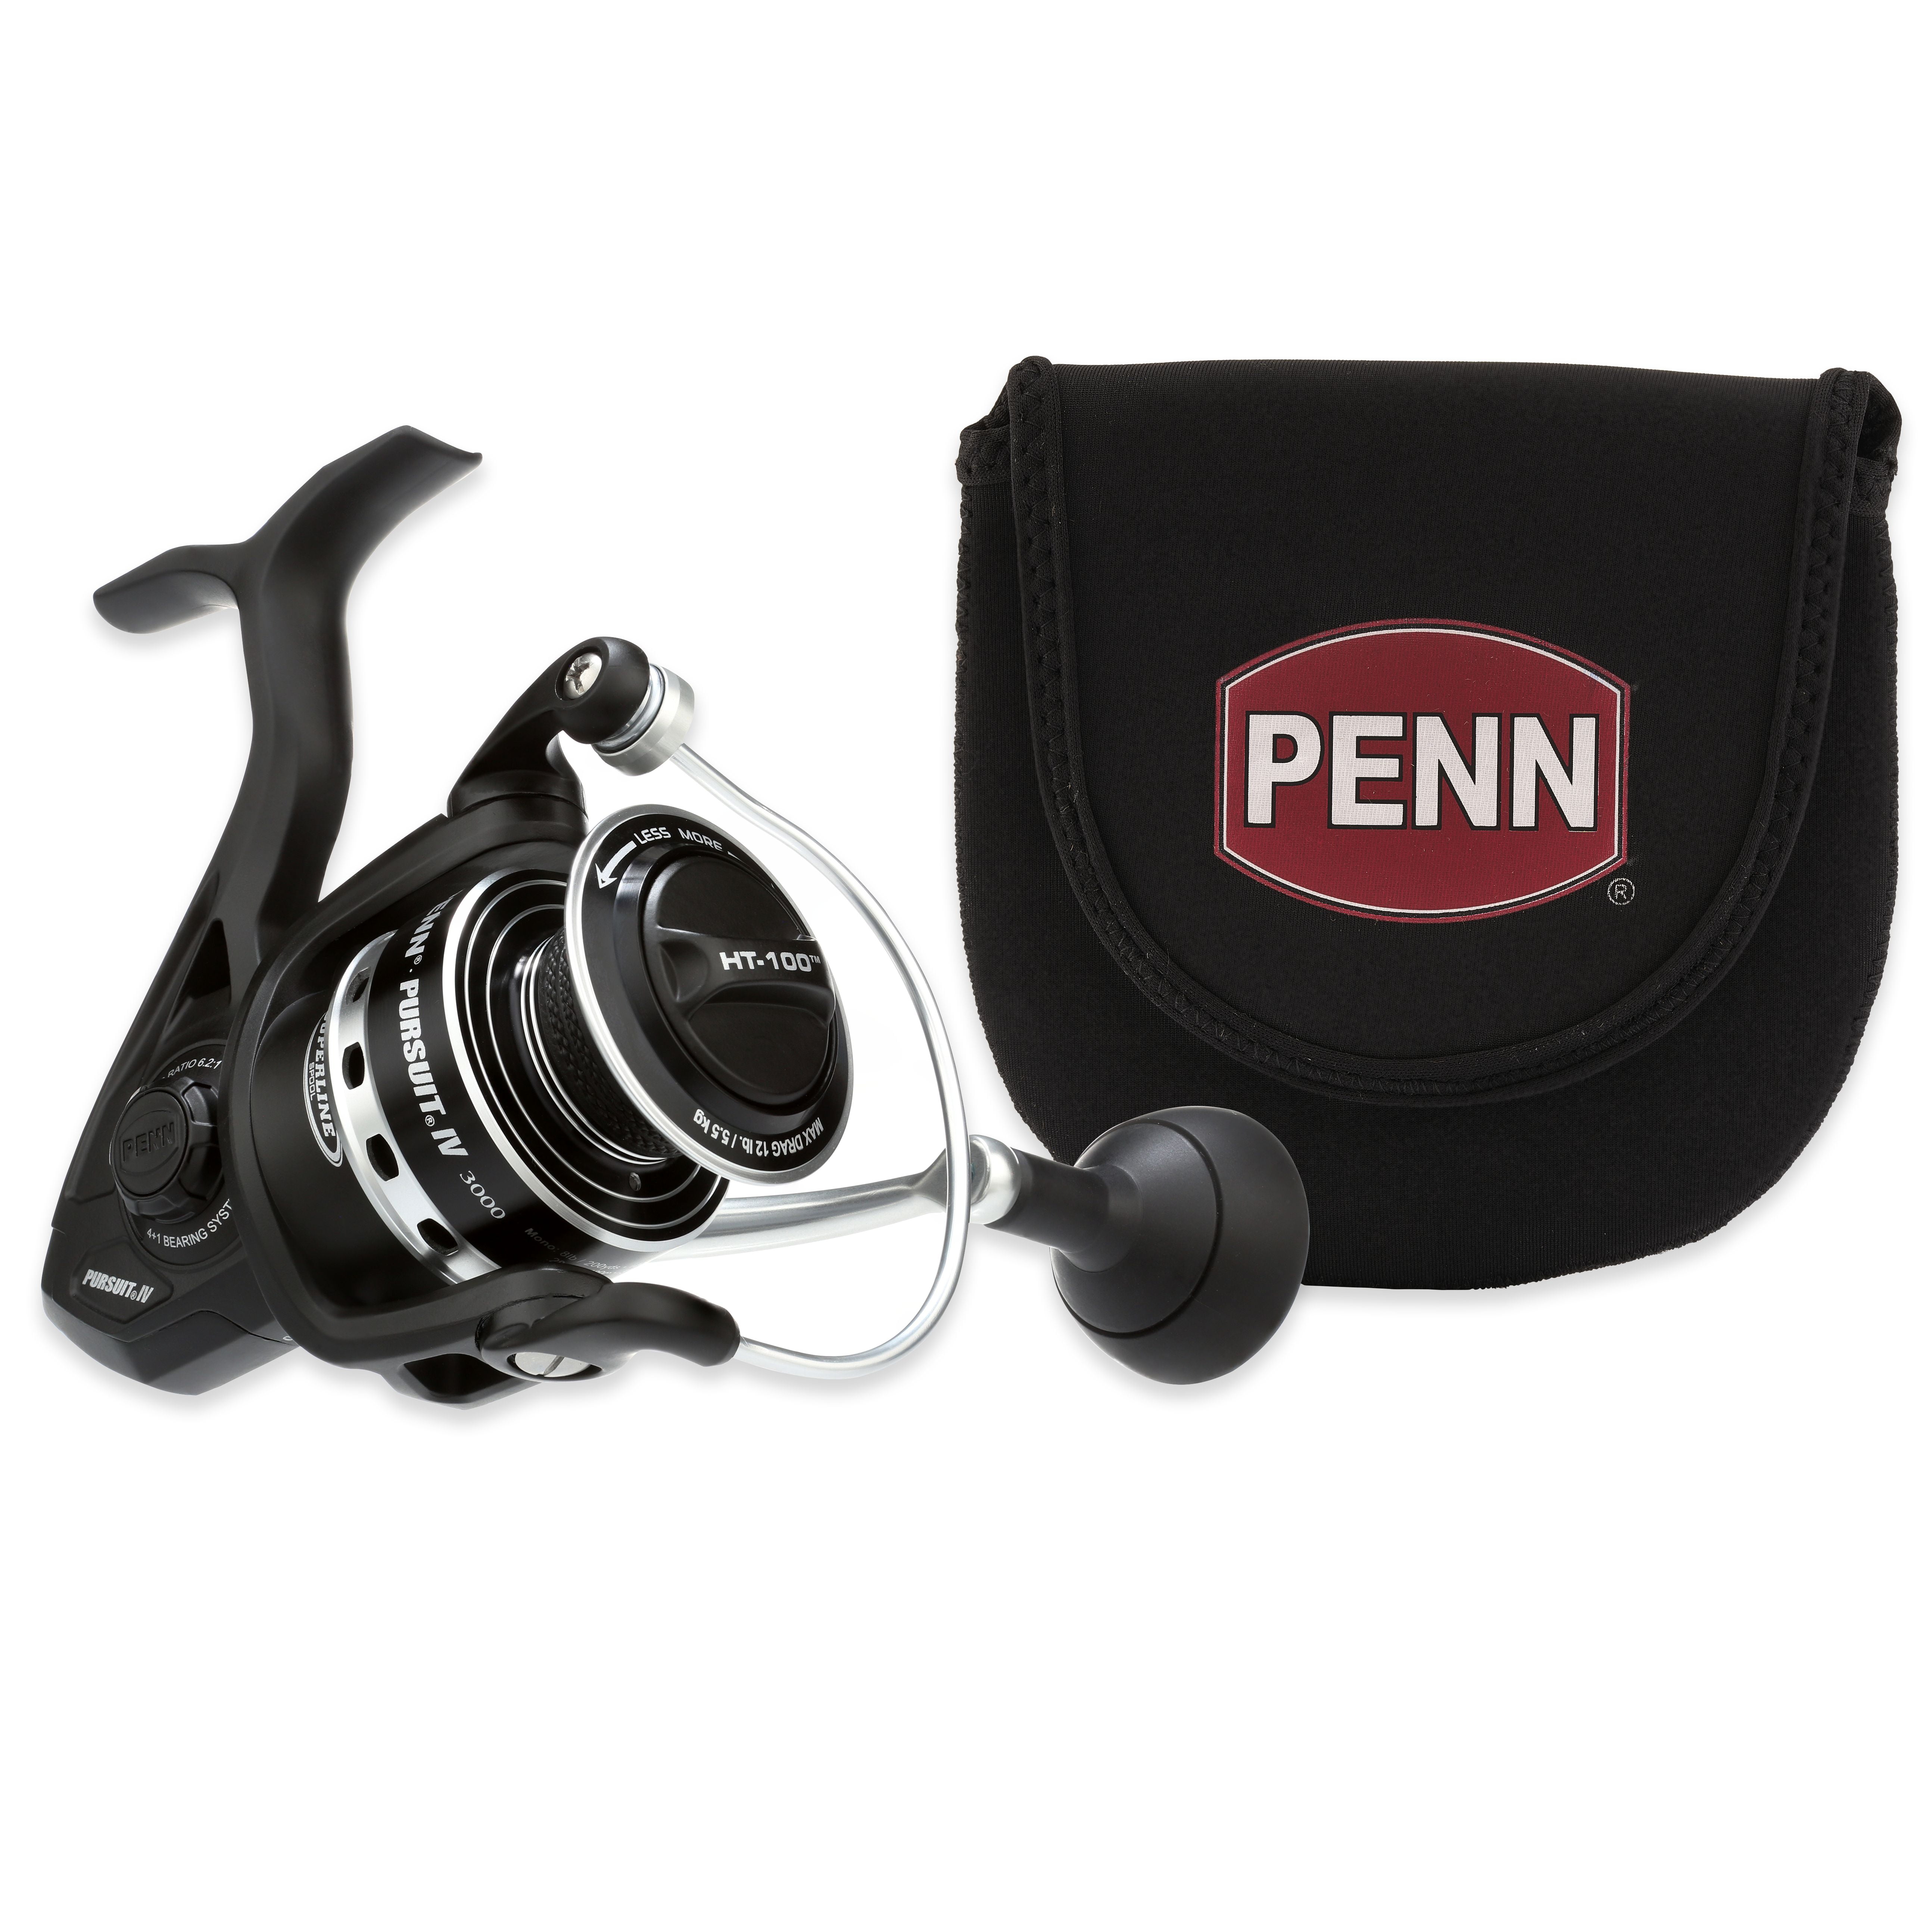 PENN NEW Fishing Reel Case / Bag - Fits Reels Up To Size 8000